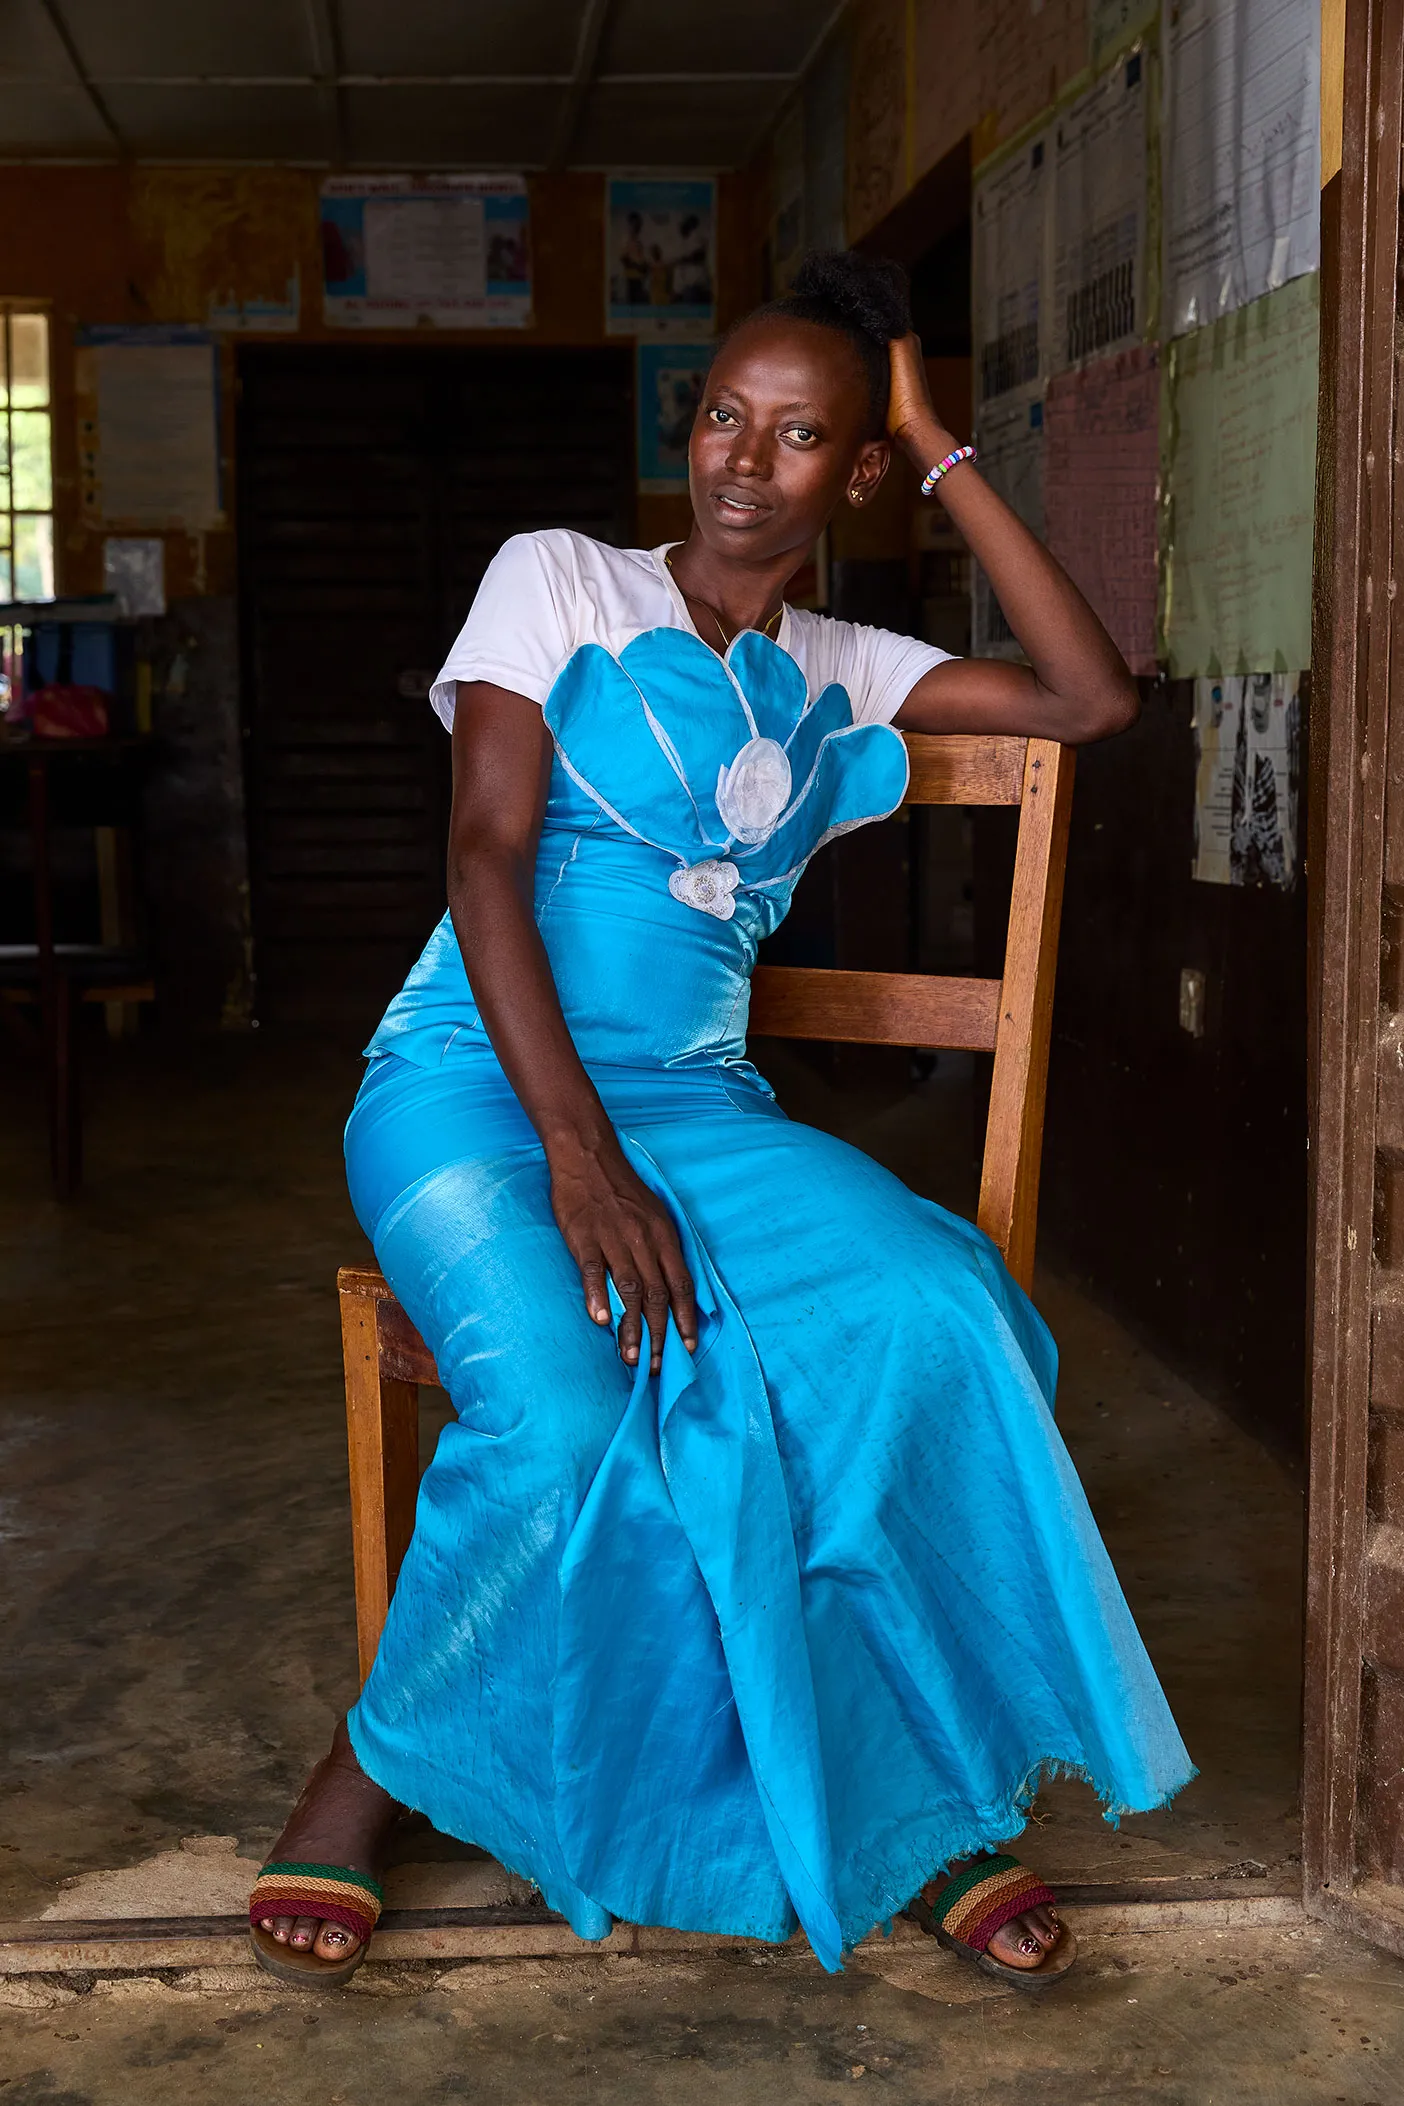 A woman wearing a long blue dress sits in a wooden chair.